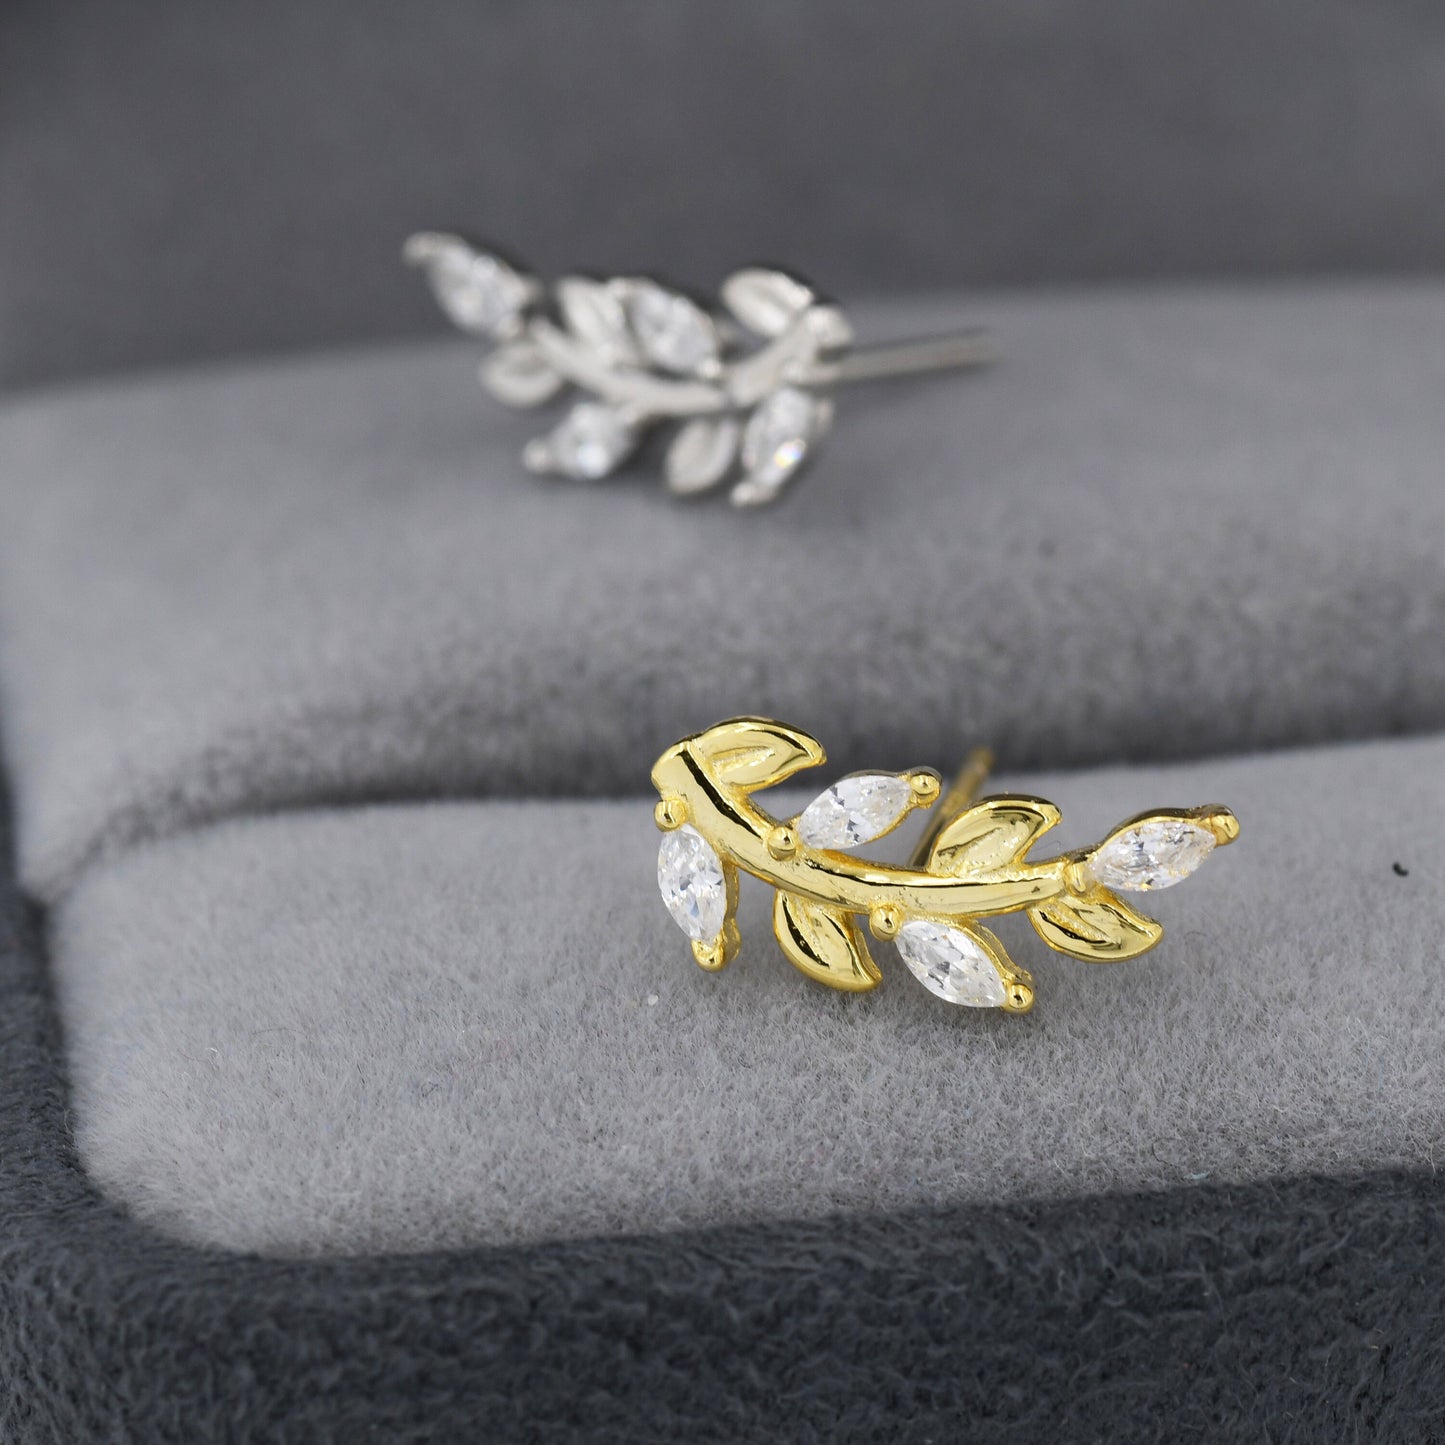 Sparkly Leaf CZ Stud Earrings in Sterling Silver, Silver or Gold, Bridal Jewellery, Bridesmaid&#39;s Earrings, Nature Inspired, Botanical